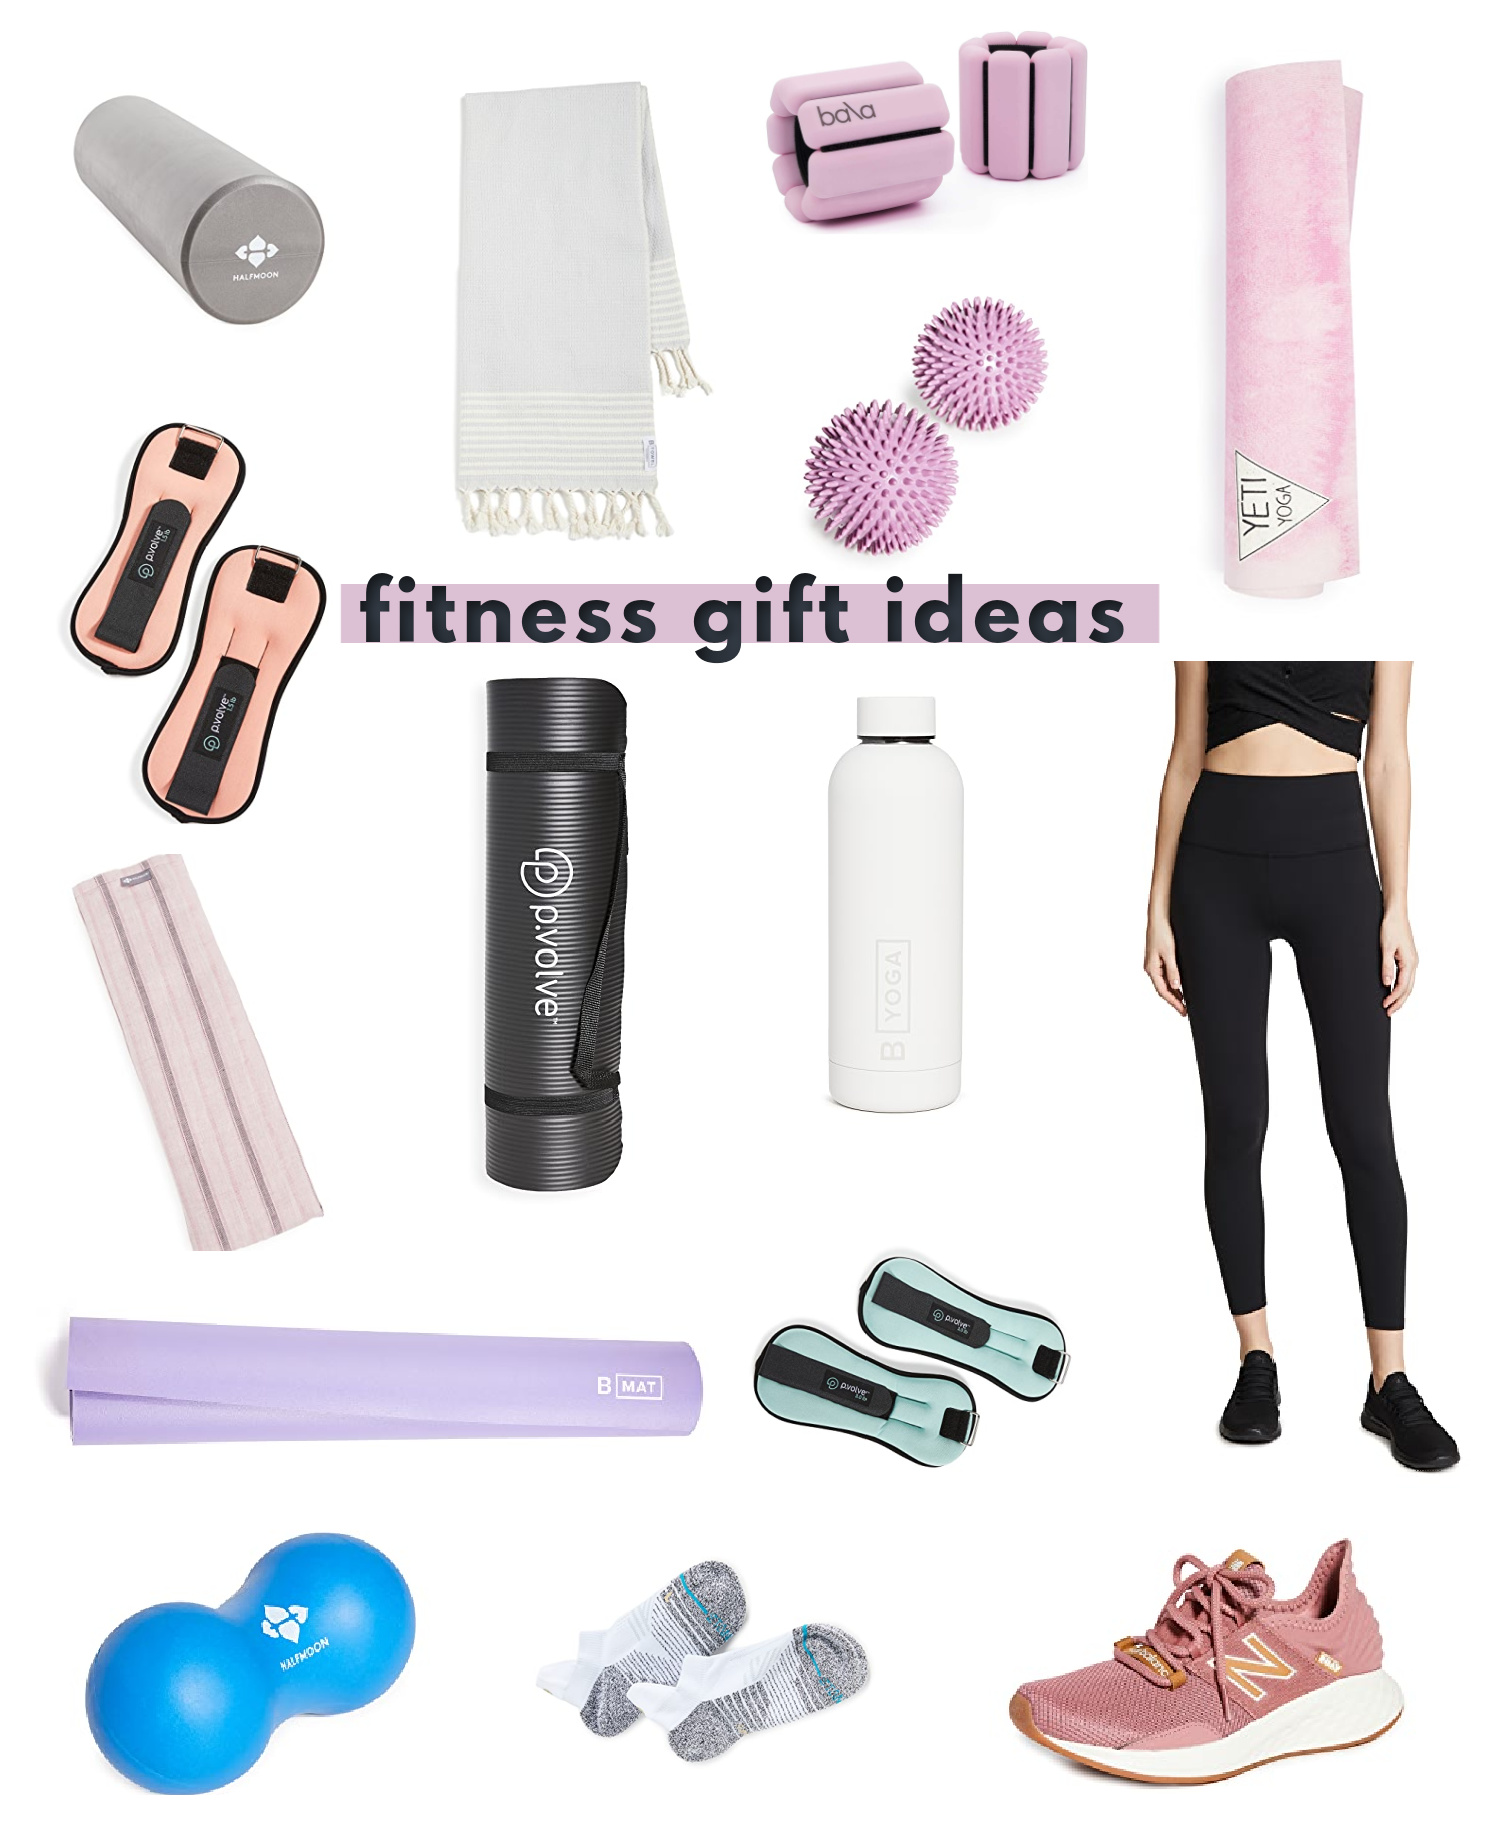 Unique fitness Christmas gift ideas for women - the perfect holiday gifts for women who love to workout!